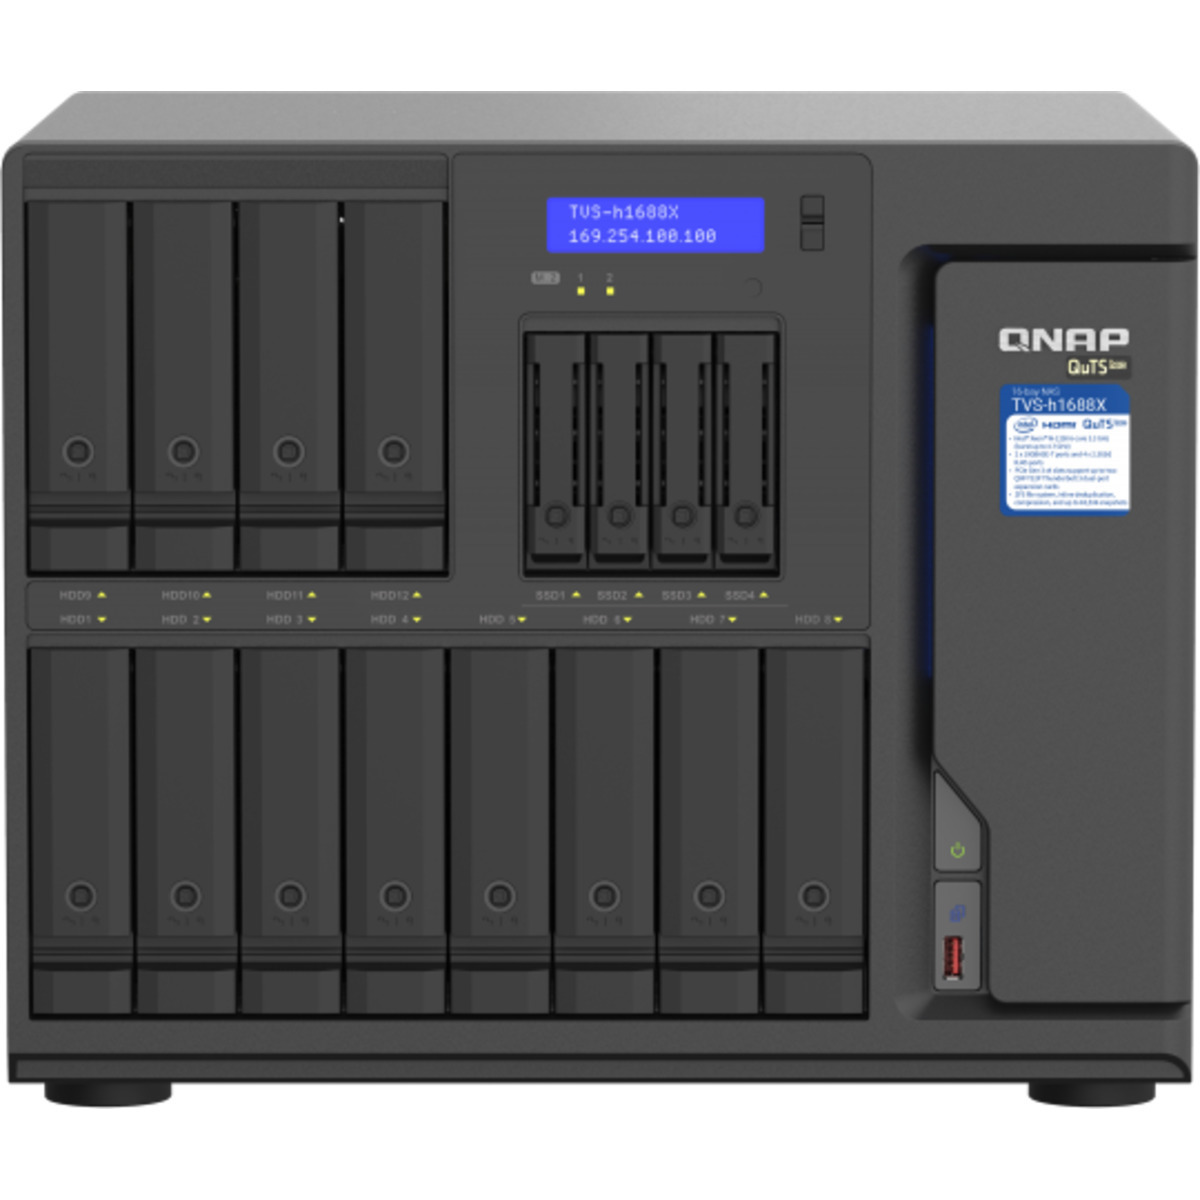 QNAP TVS-h1688X QuTS hero NAS 28tb 12+4-Bay Desktop Multimedia / Power User / Business NAS - Network Attached Storage Device 7x4tb Seagate IronWolf Pro ST4000NE001 3.5 7200rpm SATA 6Gb/s HDD NAS Class Drives Installed - Burn-In Tested TVS-h1688X QuTS hero NAS